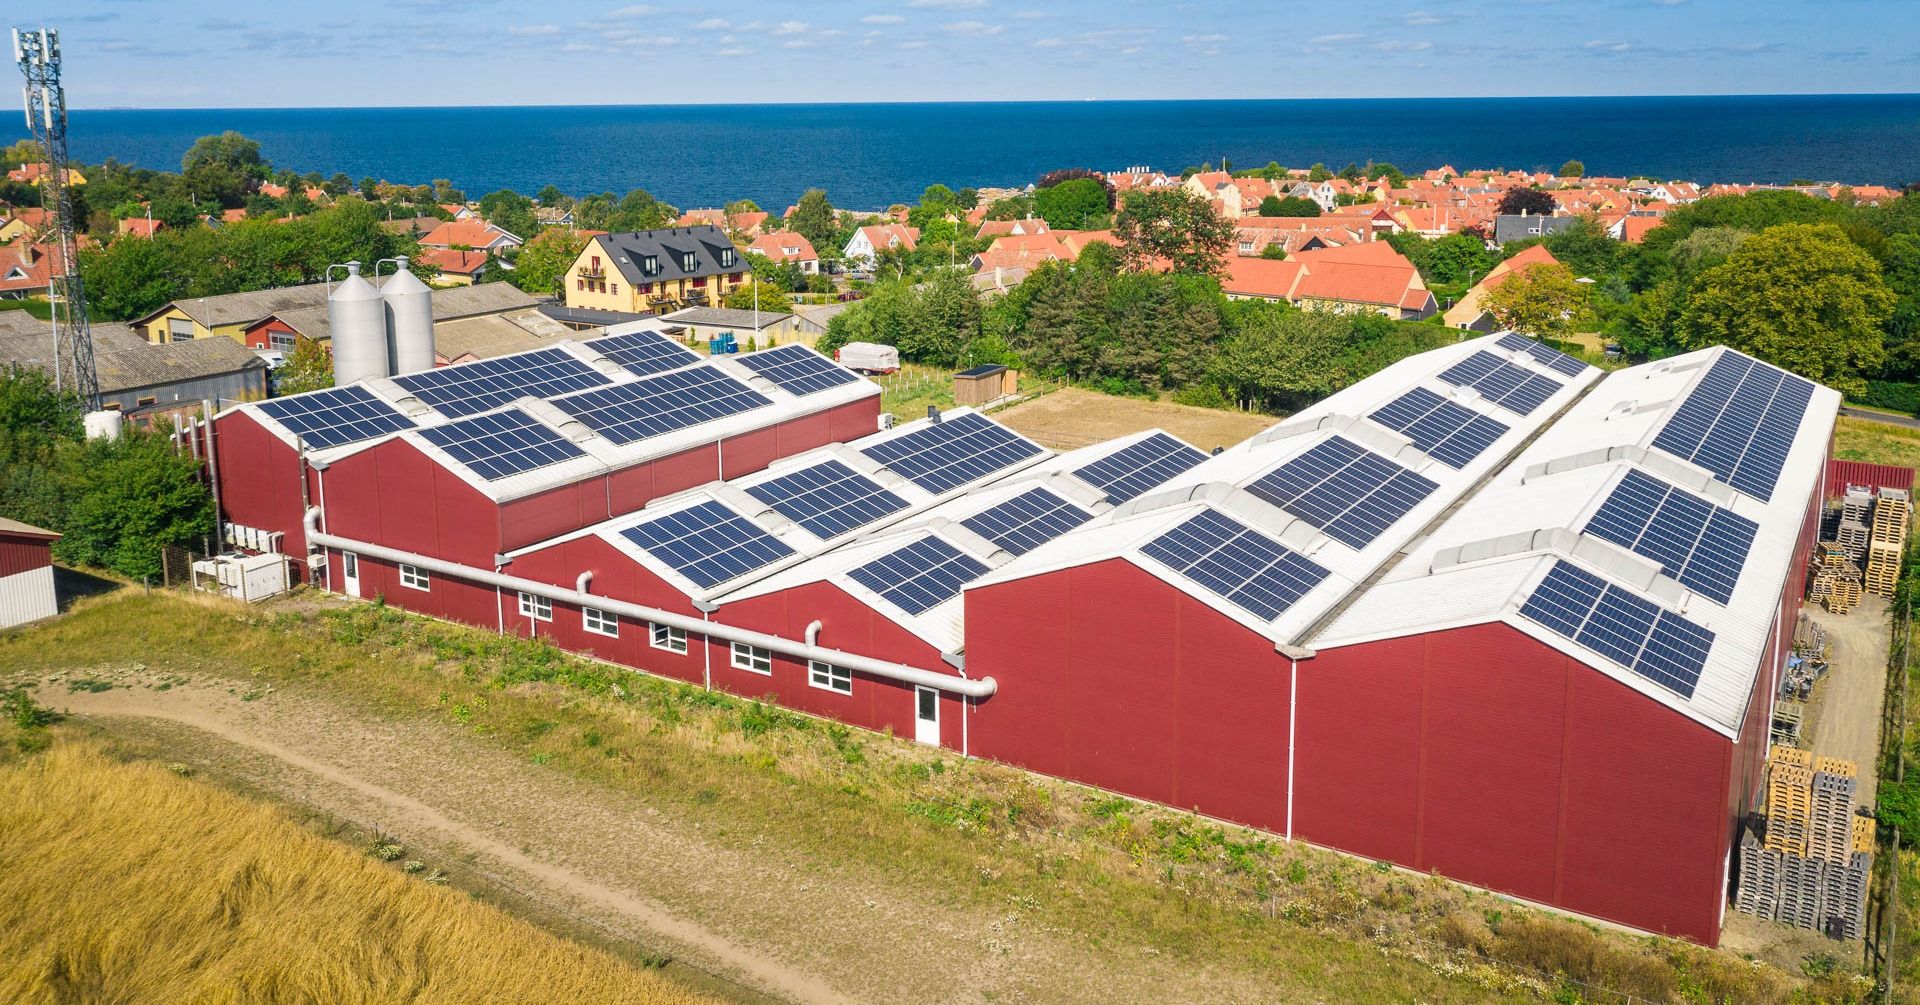 A new record, as wind and solar energy account for close to 60 percent of Denmark’s annual energy consumption